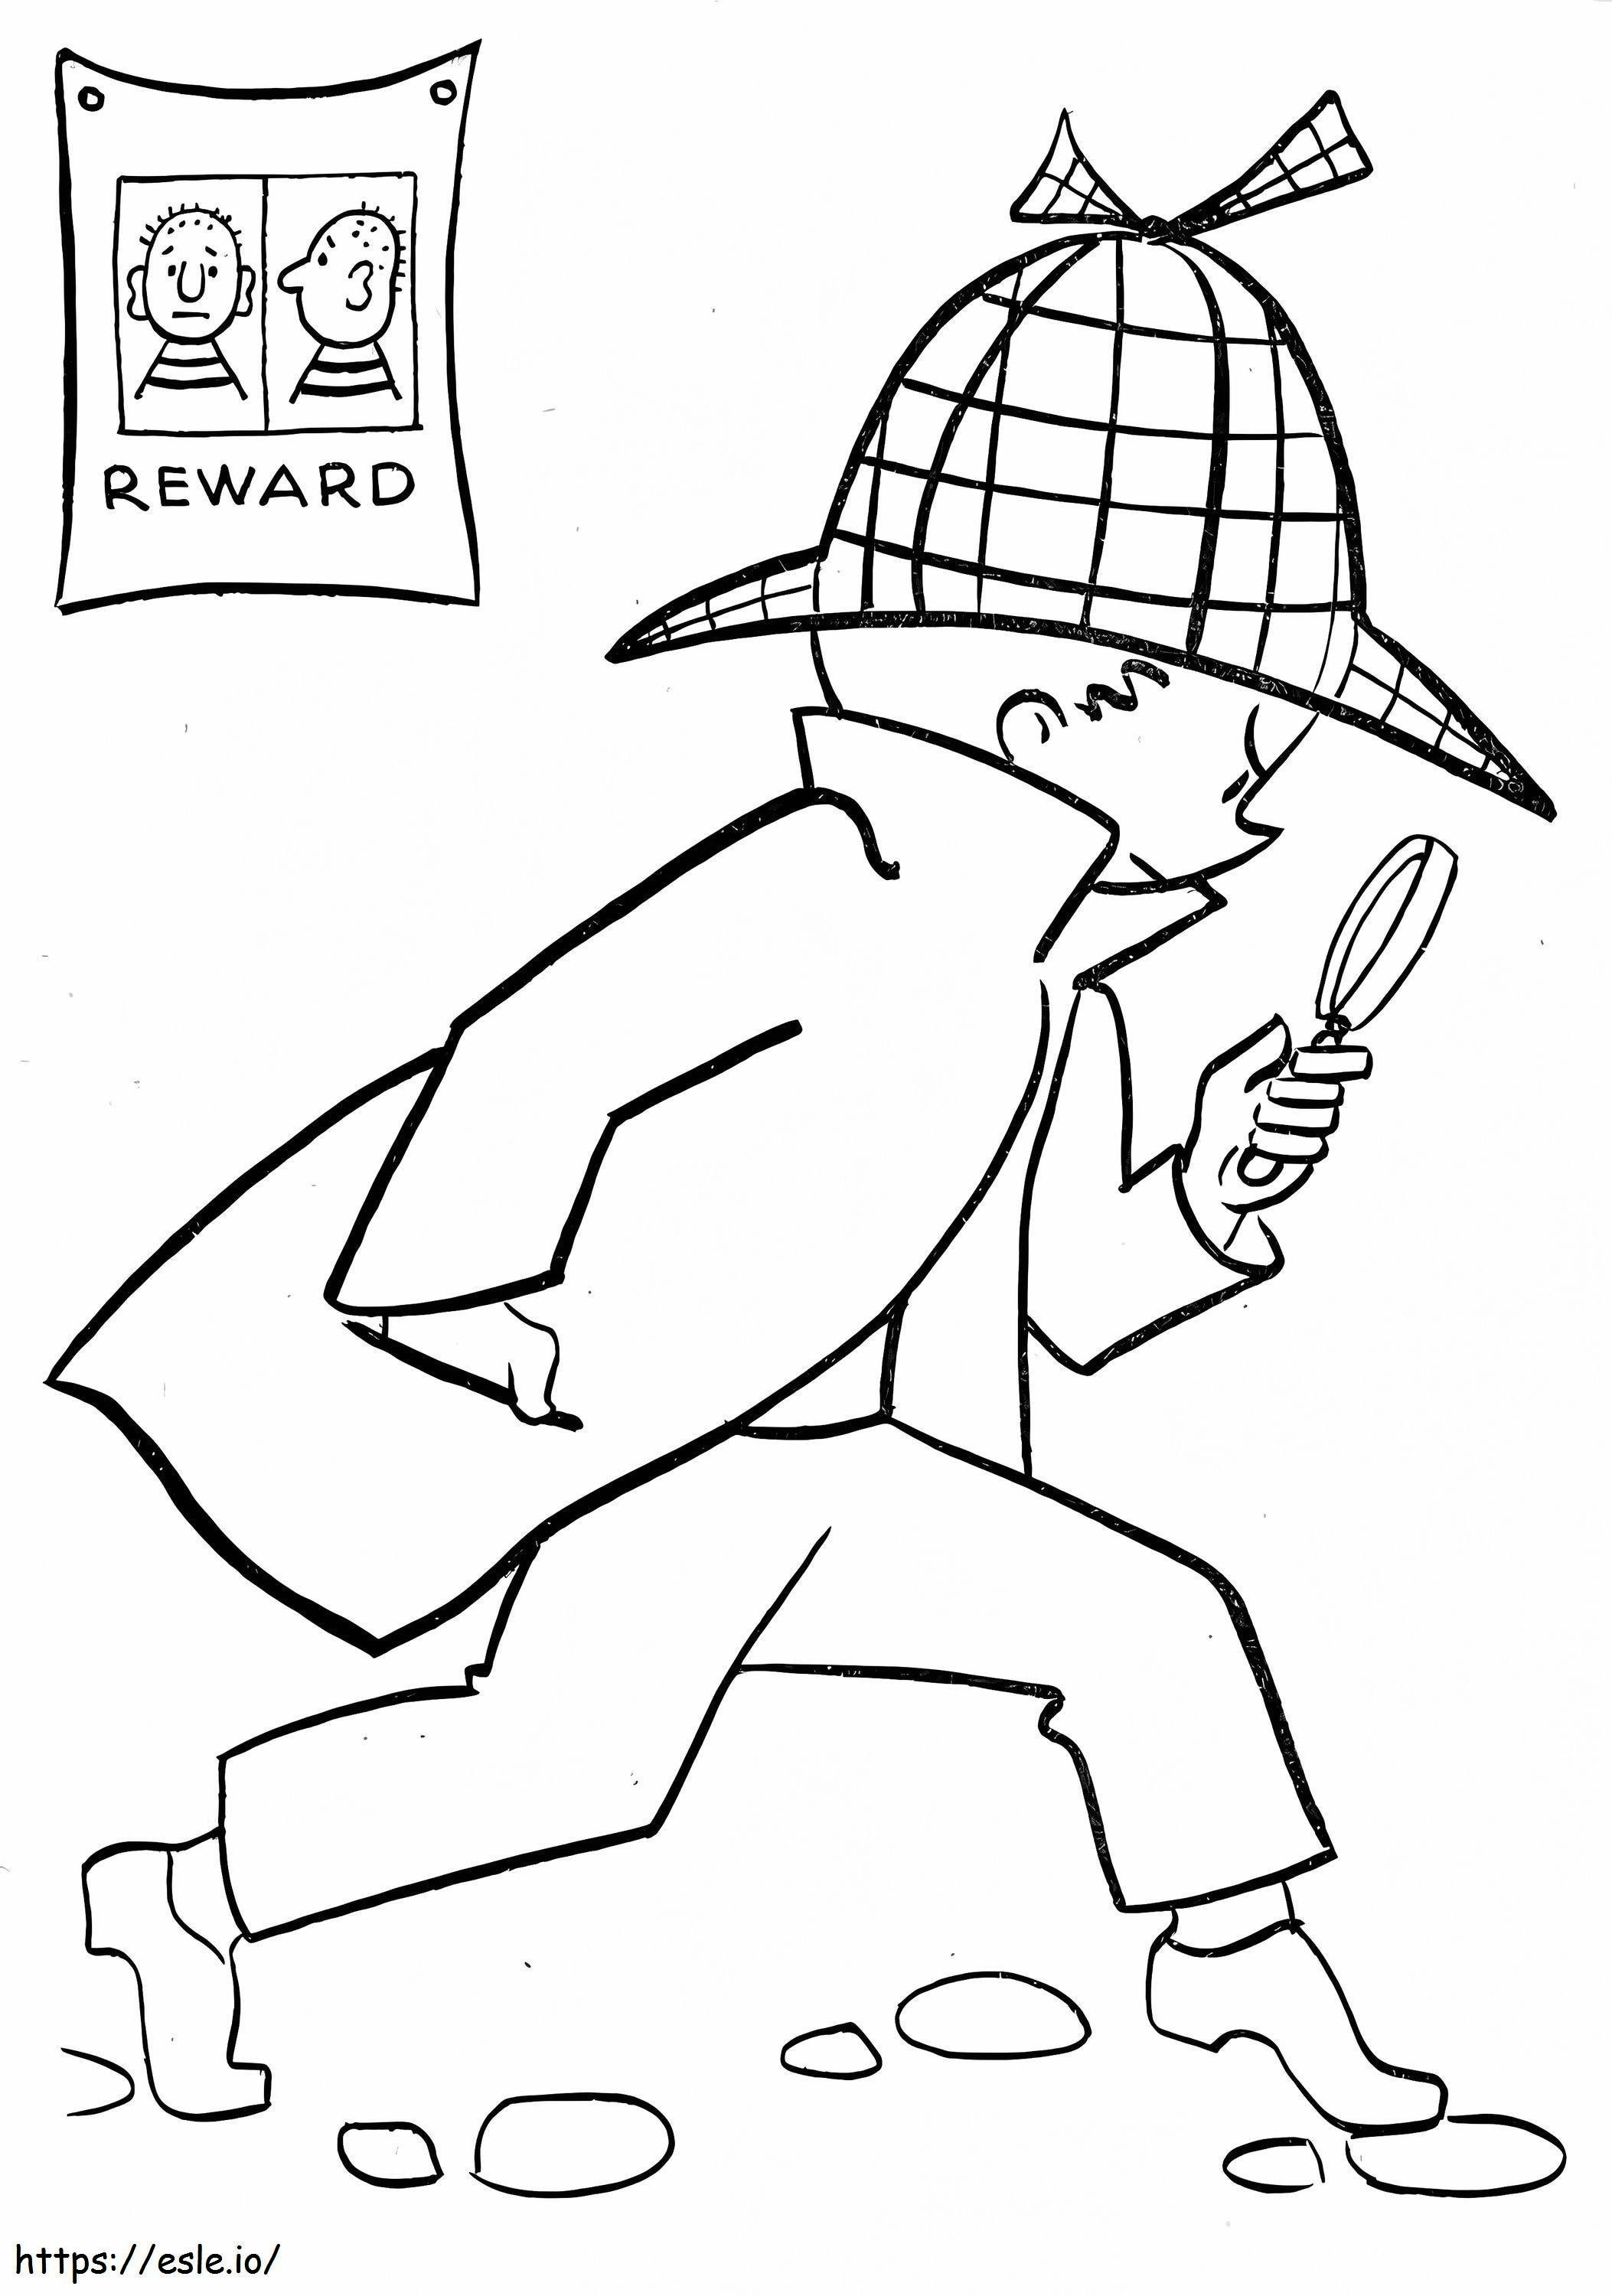 Detective 5 coloring page